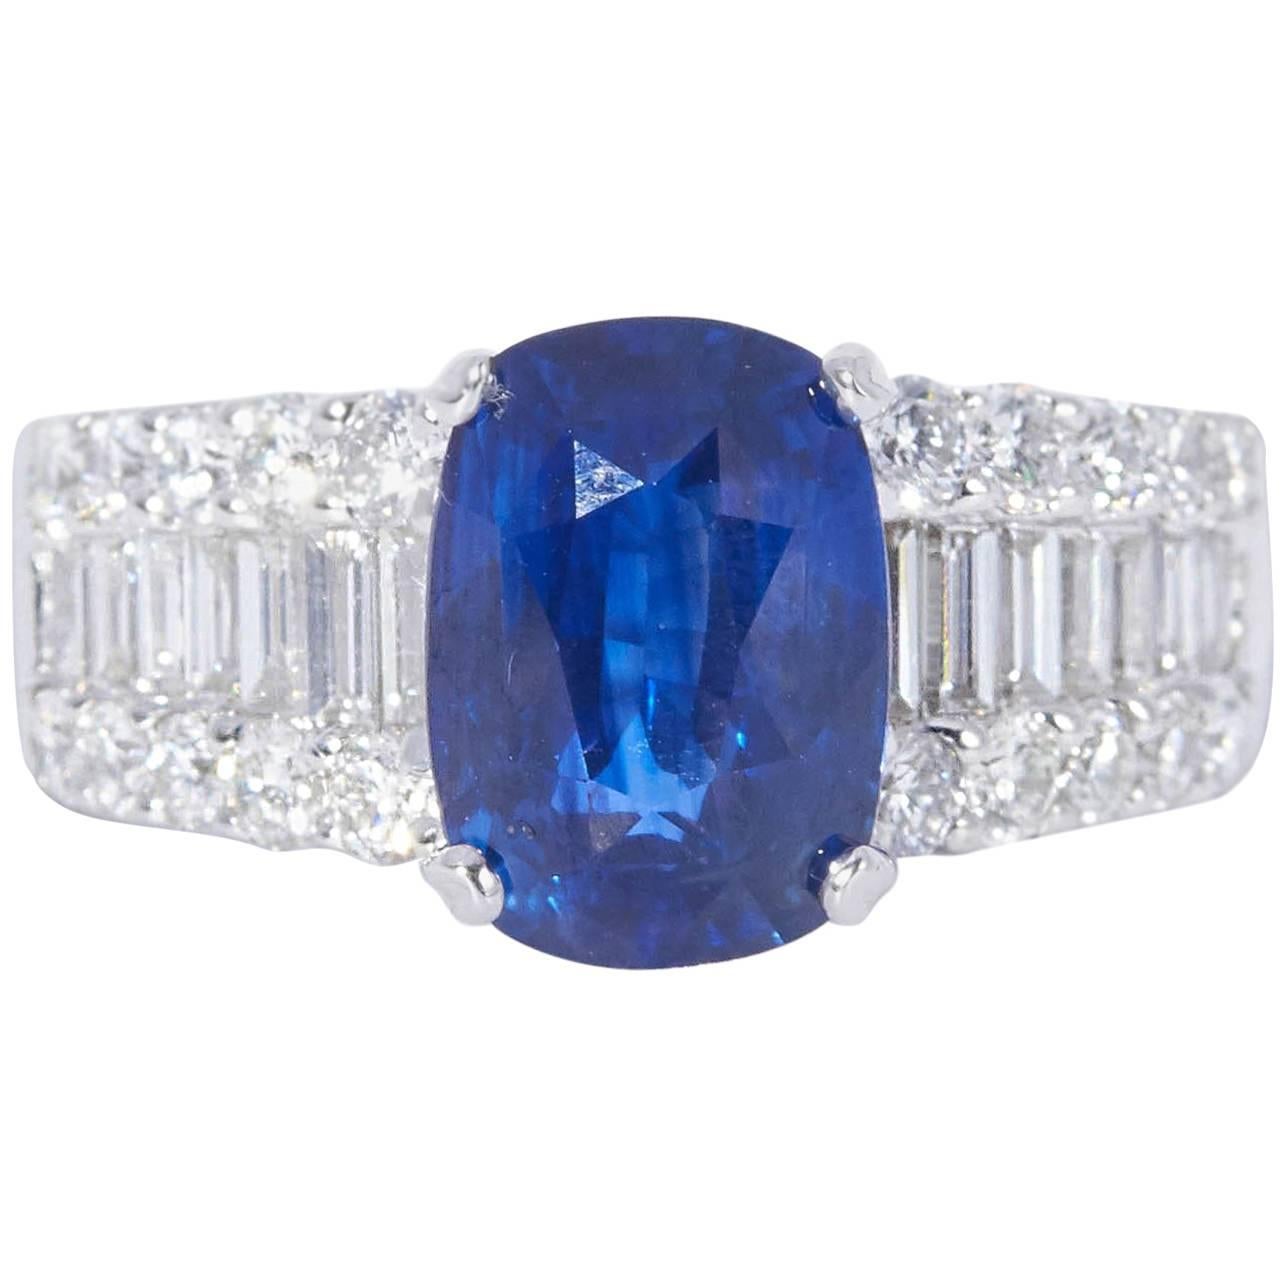 Diamond and Oval Sapphire 4.53 Carat Engagement Ring